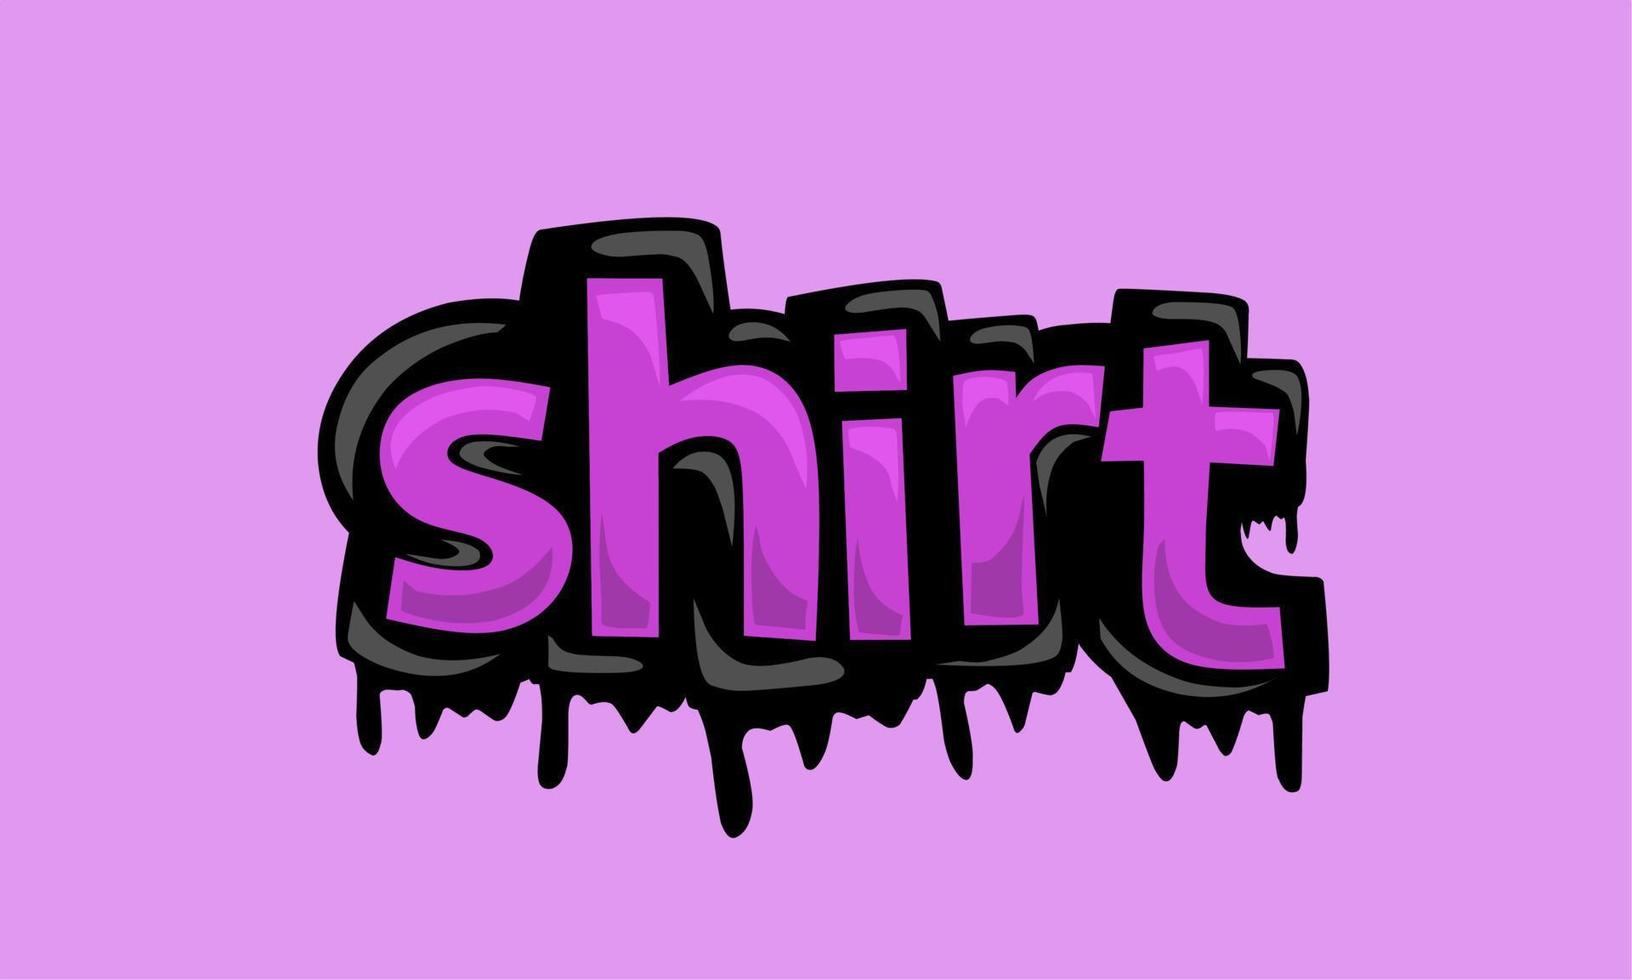 SHIRT writing vector design on pink background